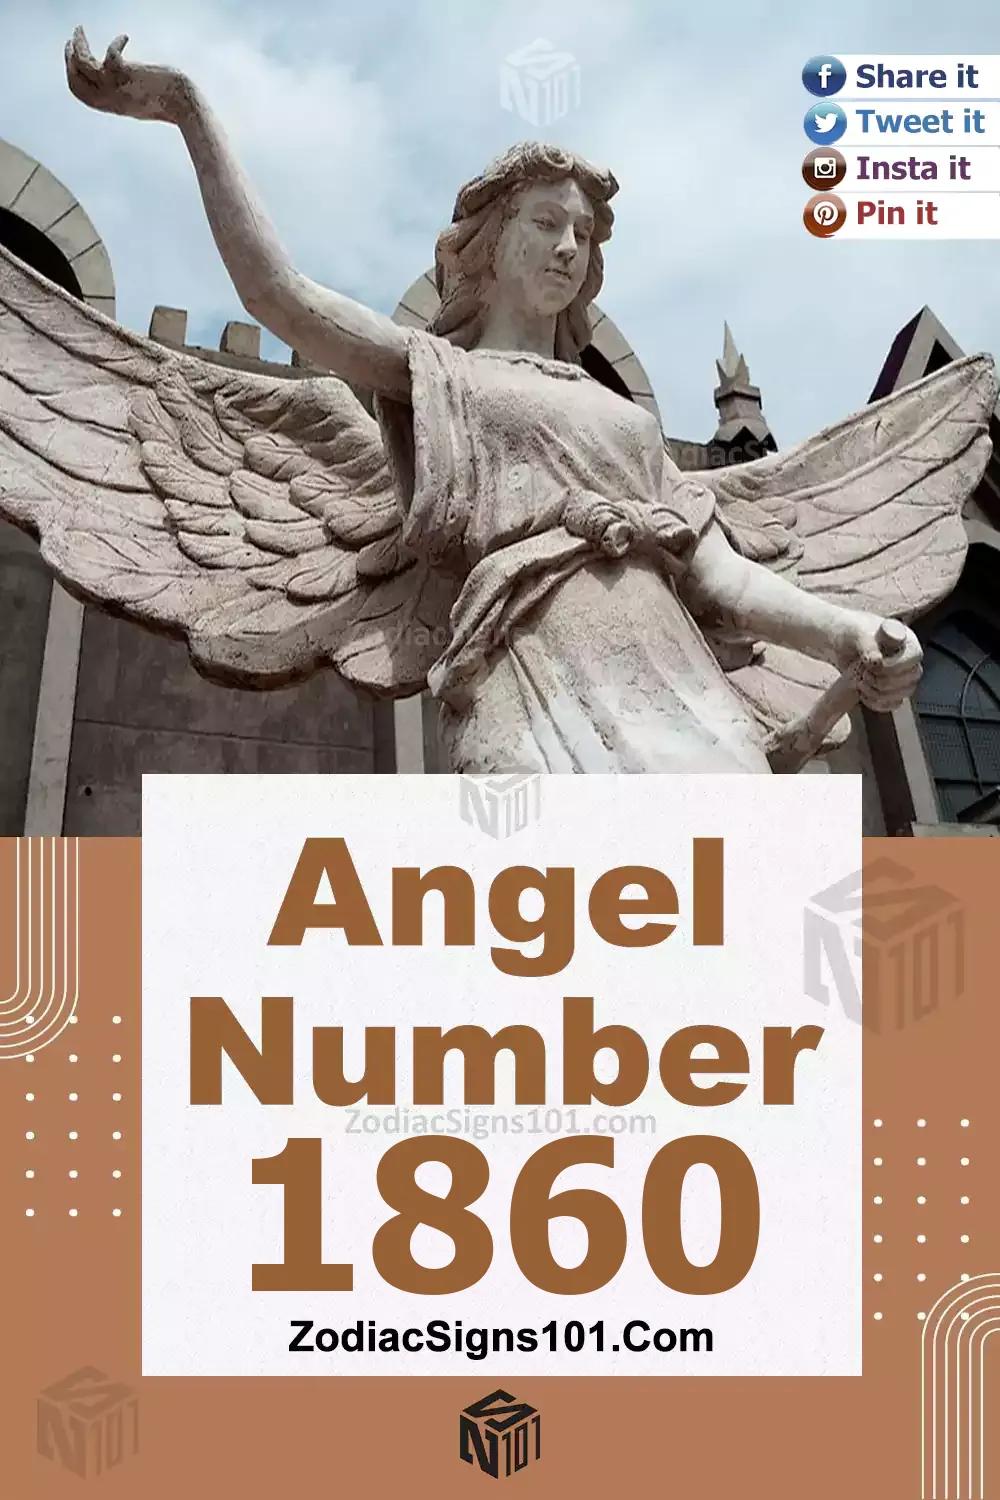 1860 Angel Number Meaning